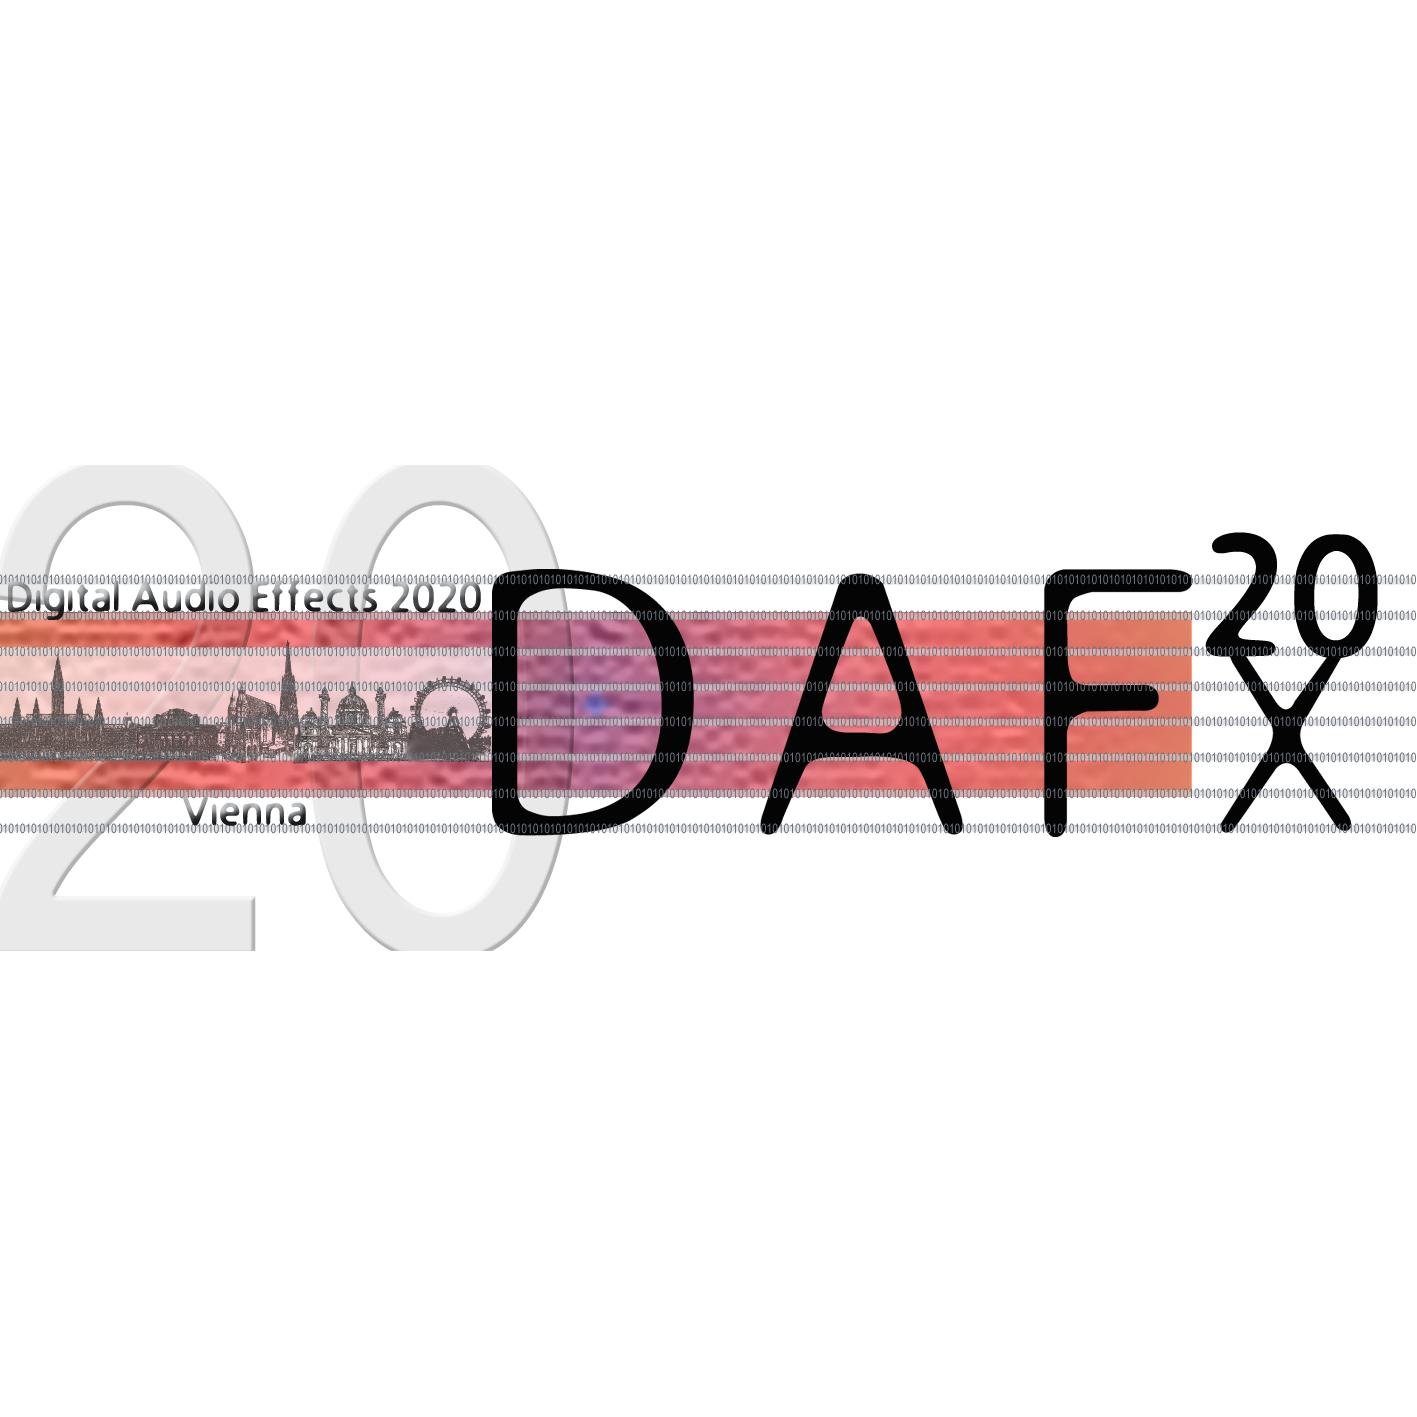 Digital Audio Effects Conference, Vienna, 8-12 Sept. 2020